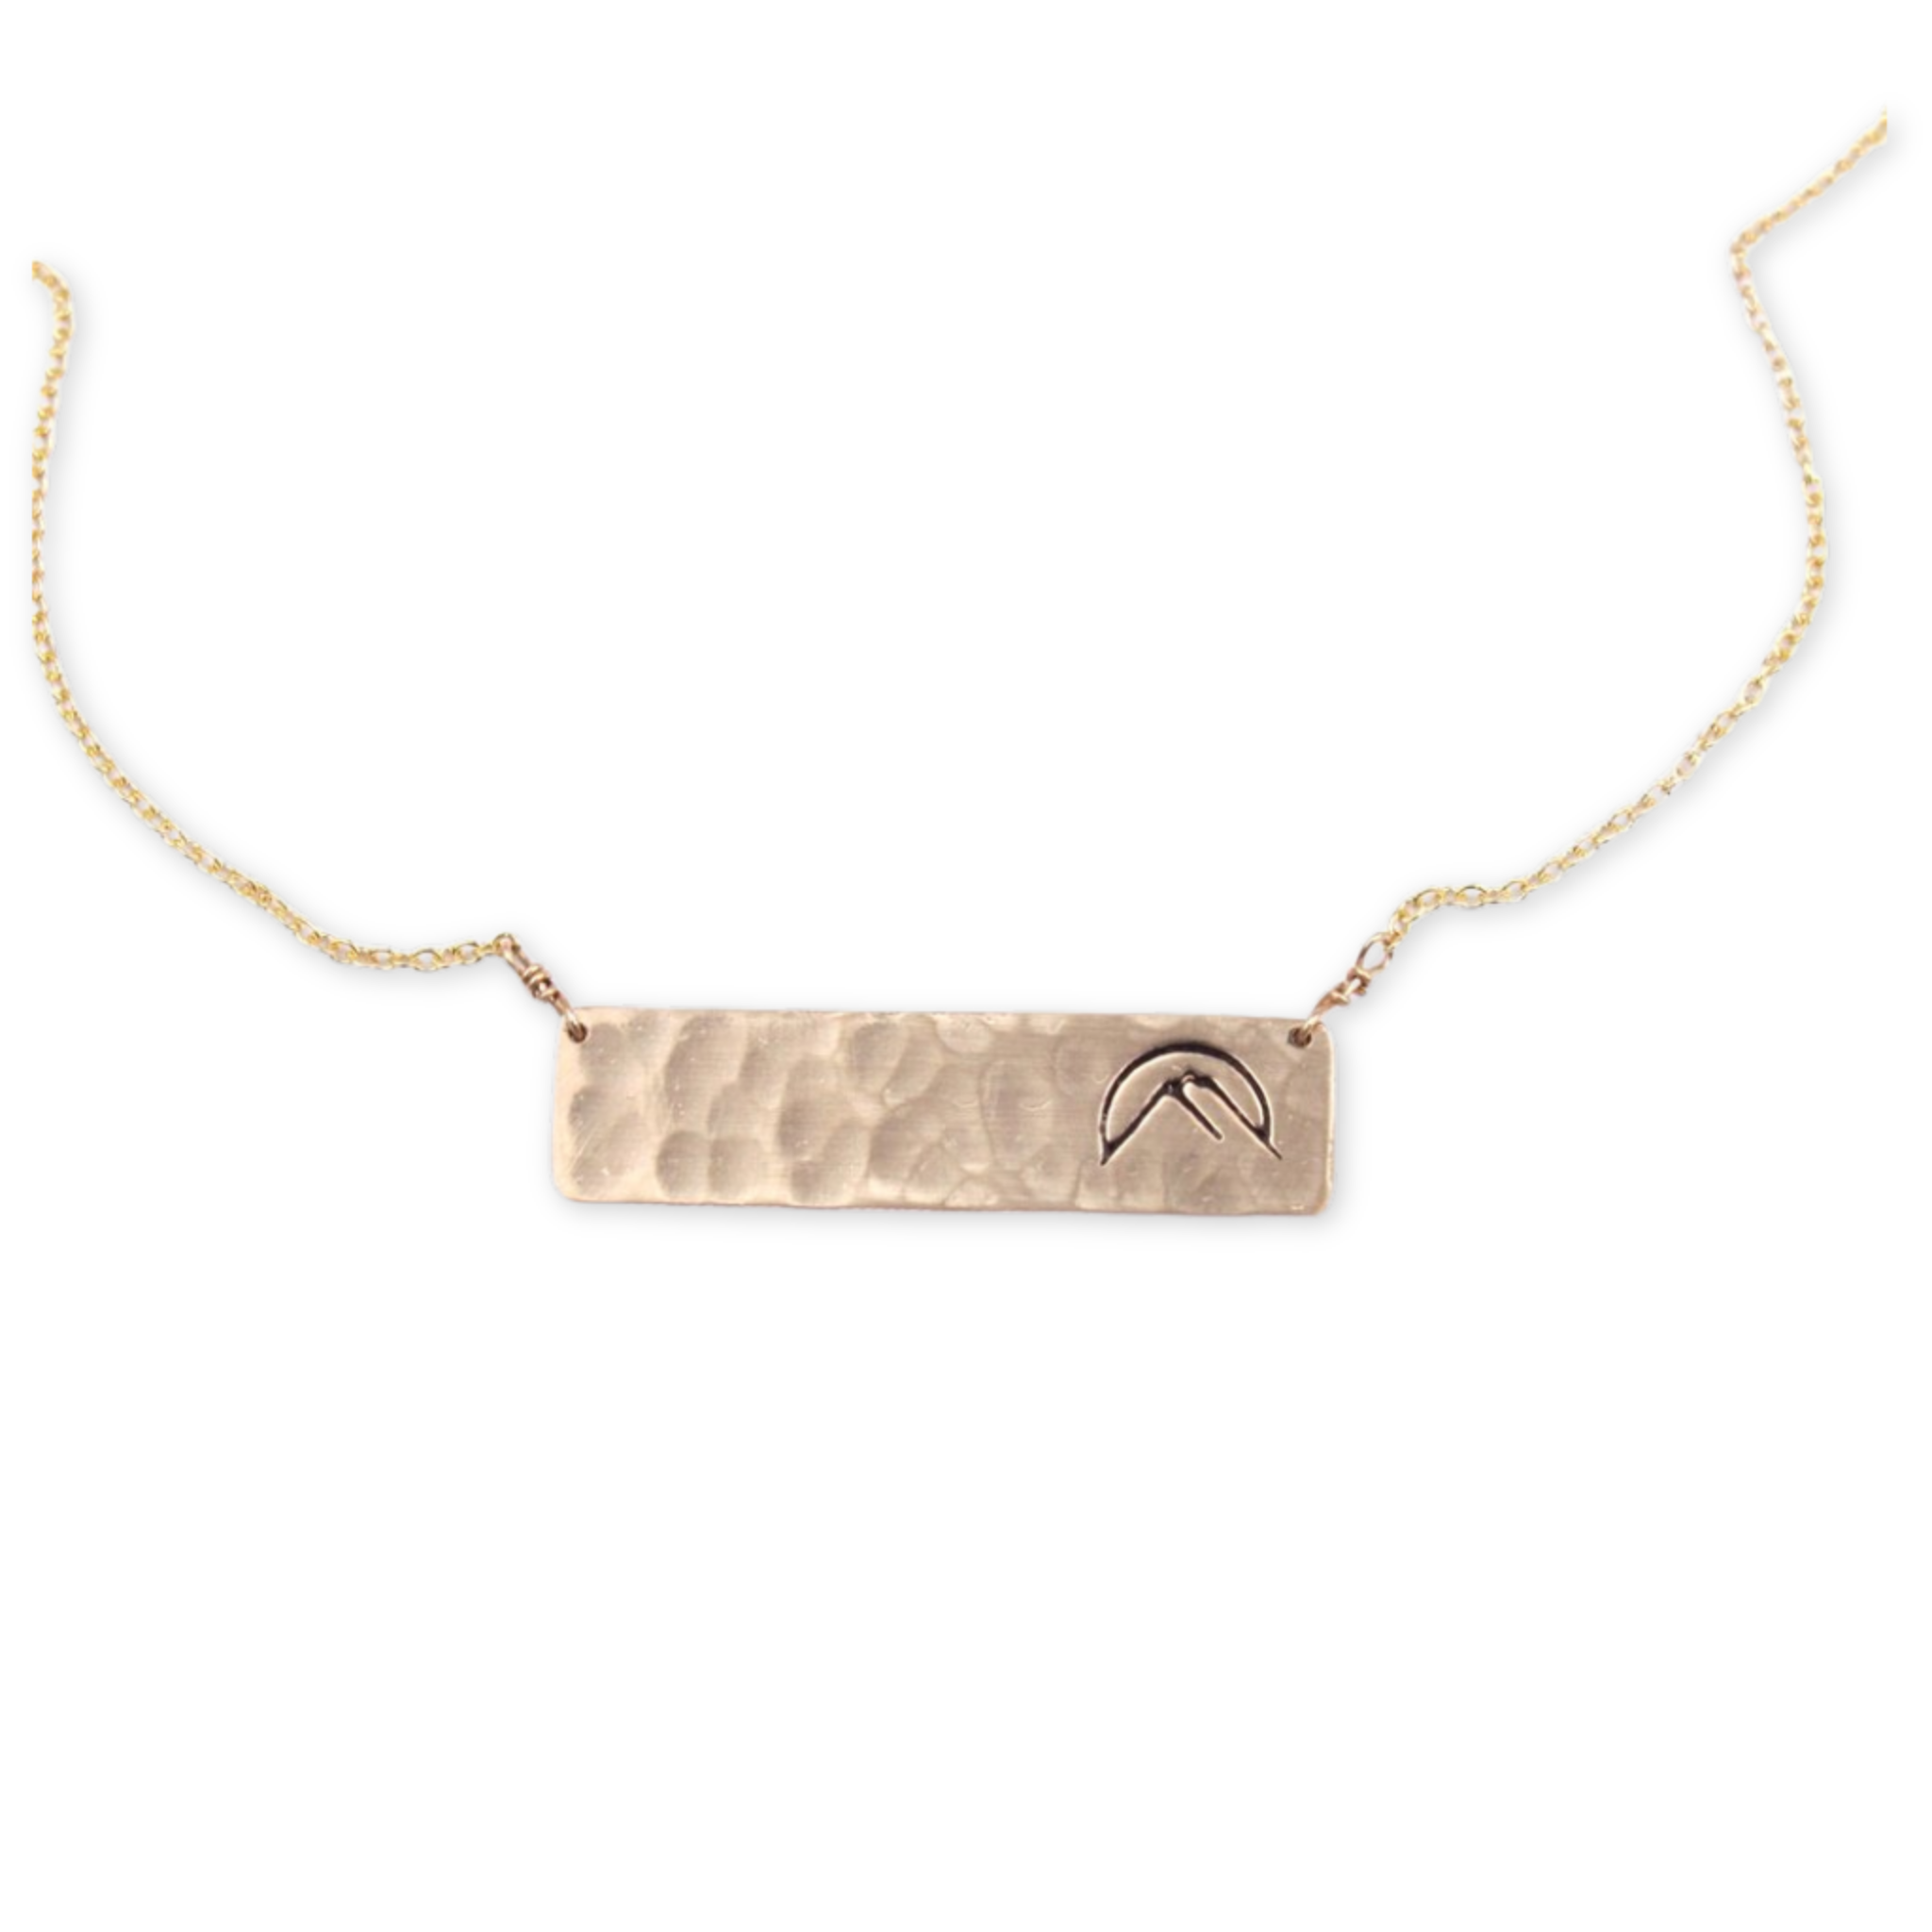 hammered rectangle pendant with stamped mountain design hanging from a delicate necklace chain